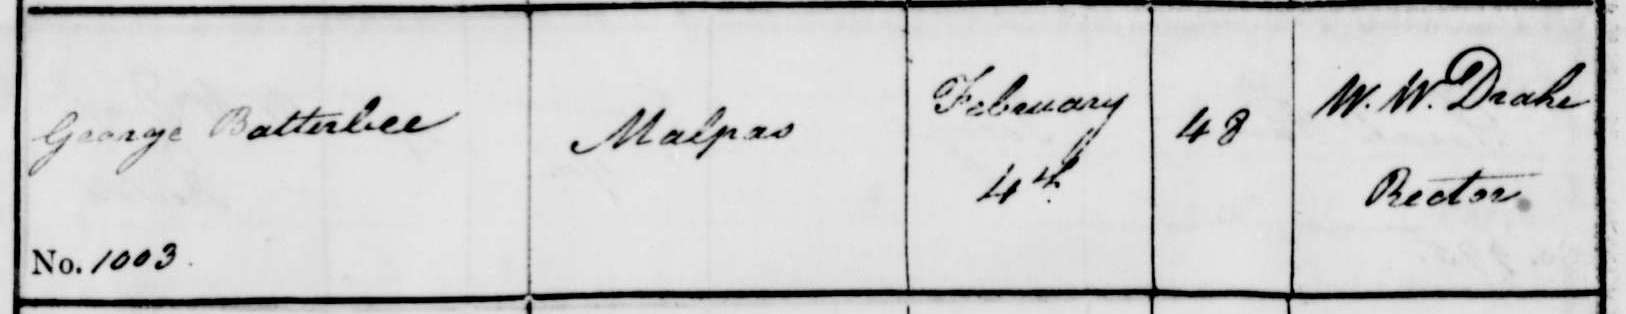 Taken on February 4th, 1824 in Malpas and sourced from Burial Rocords - Malpas.